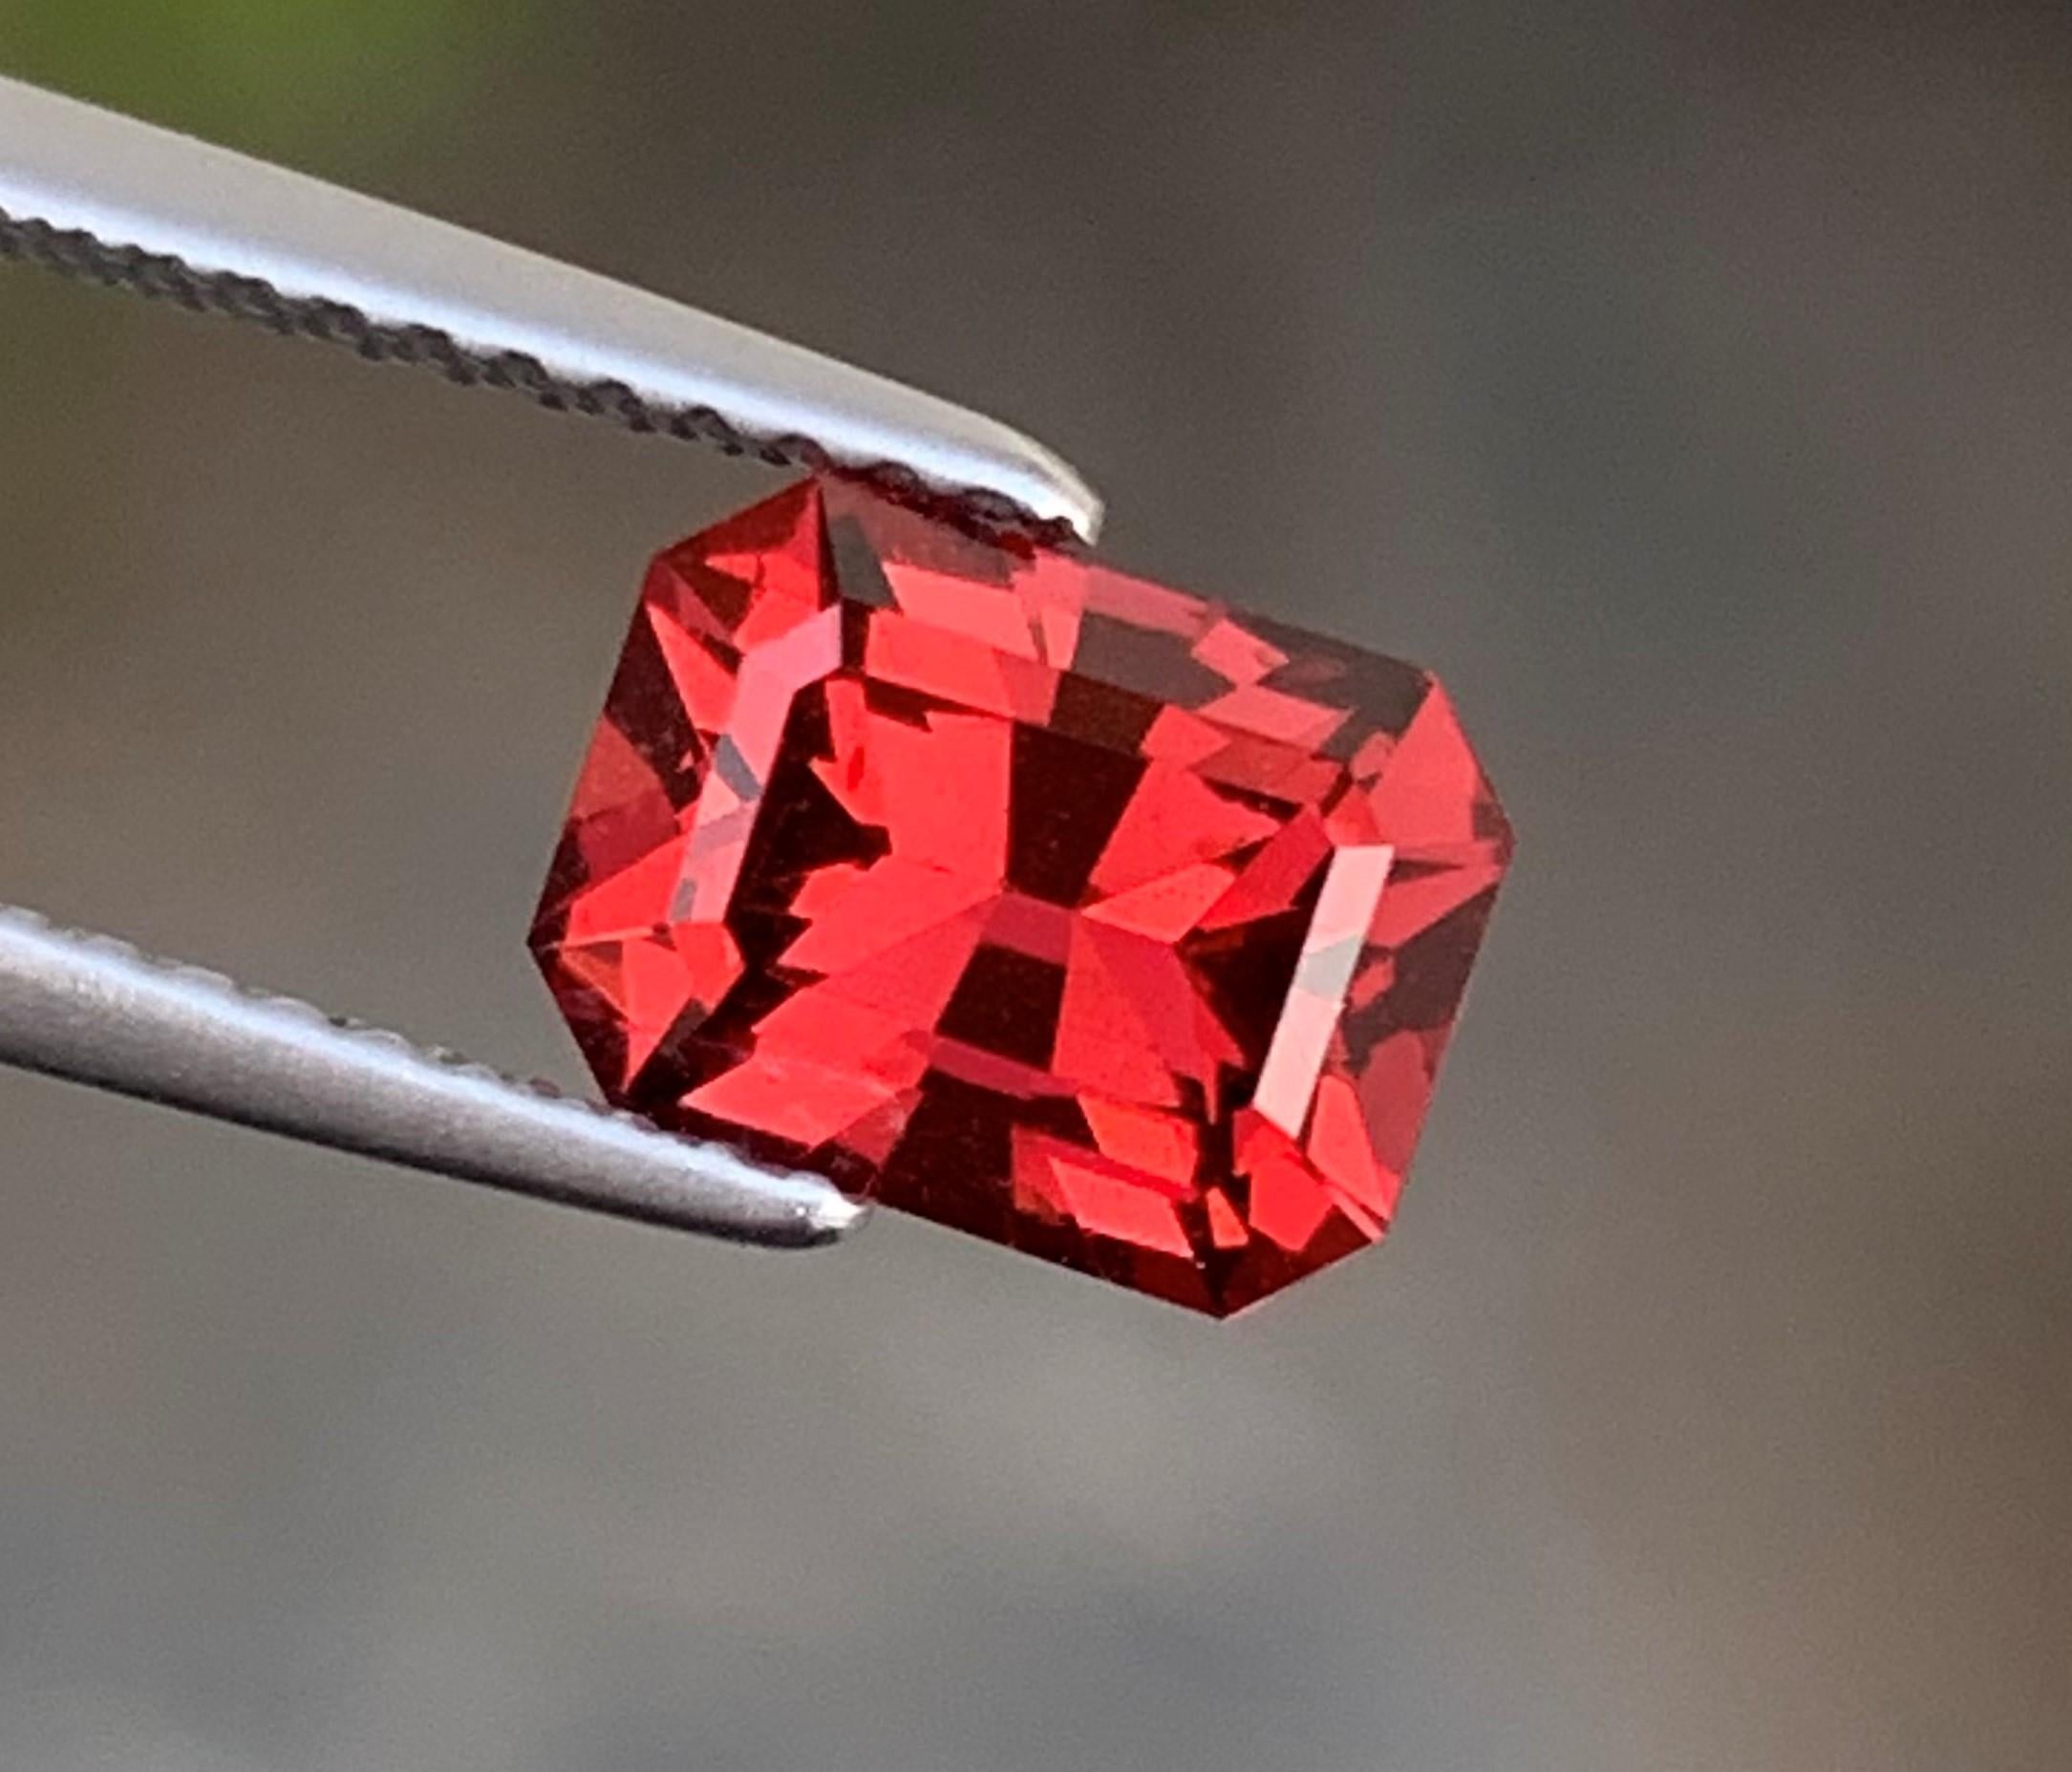 Loose Rhodolite Garnet
Weight : 2.0 Carats
Dimensions : 7.8x5.8x4.6 Mm
Origin : Madagascar Africa
Clarity : AAA Eye Clean
Shape: Fancy Cut Emerald Shape
Certificate: On Demand
Treatment: Non
Color: Red
.
Rhodolite is a mixture of pyrope and